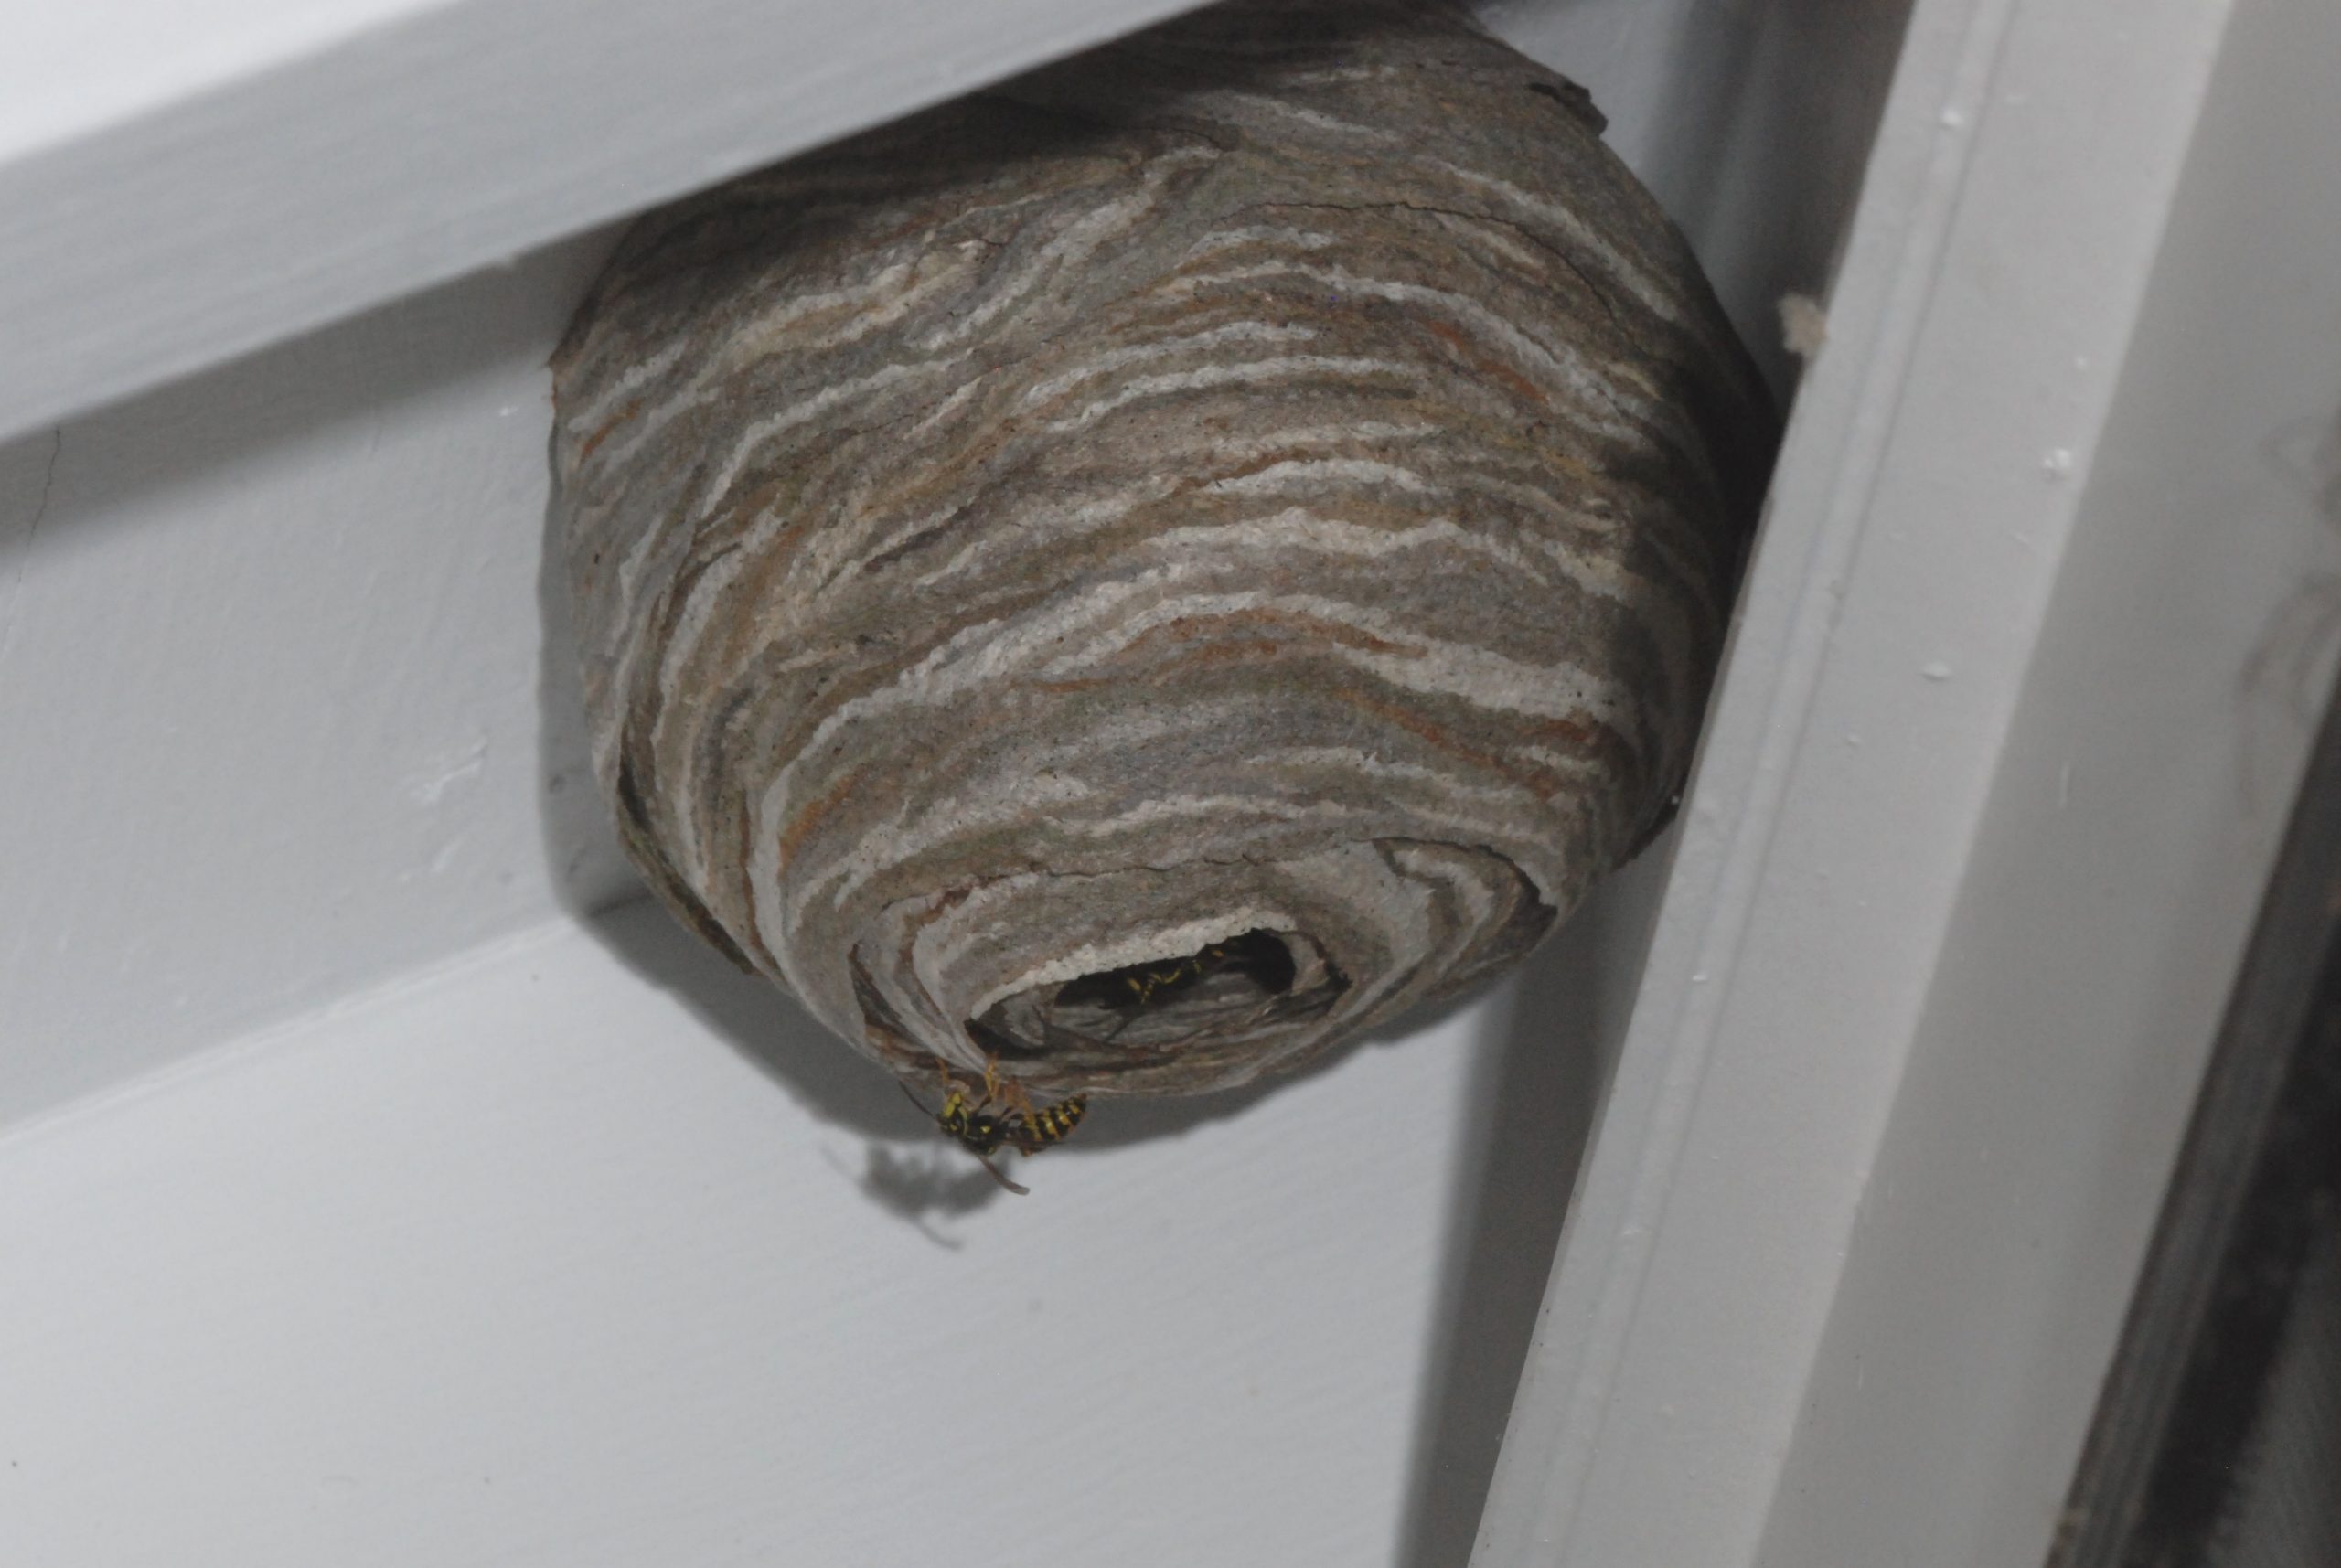 Where Do Insects Typically Nest in a House?